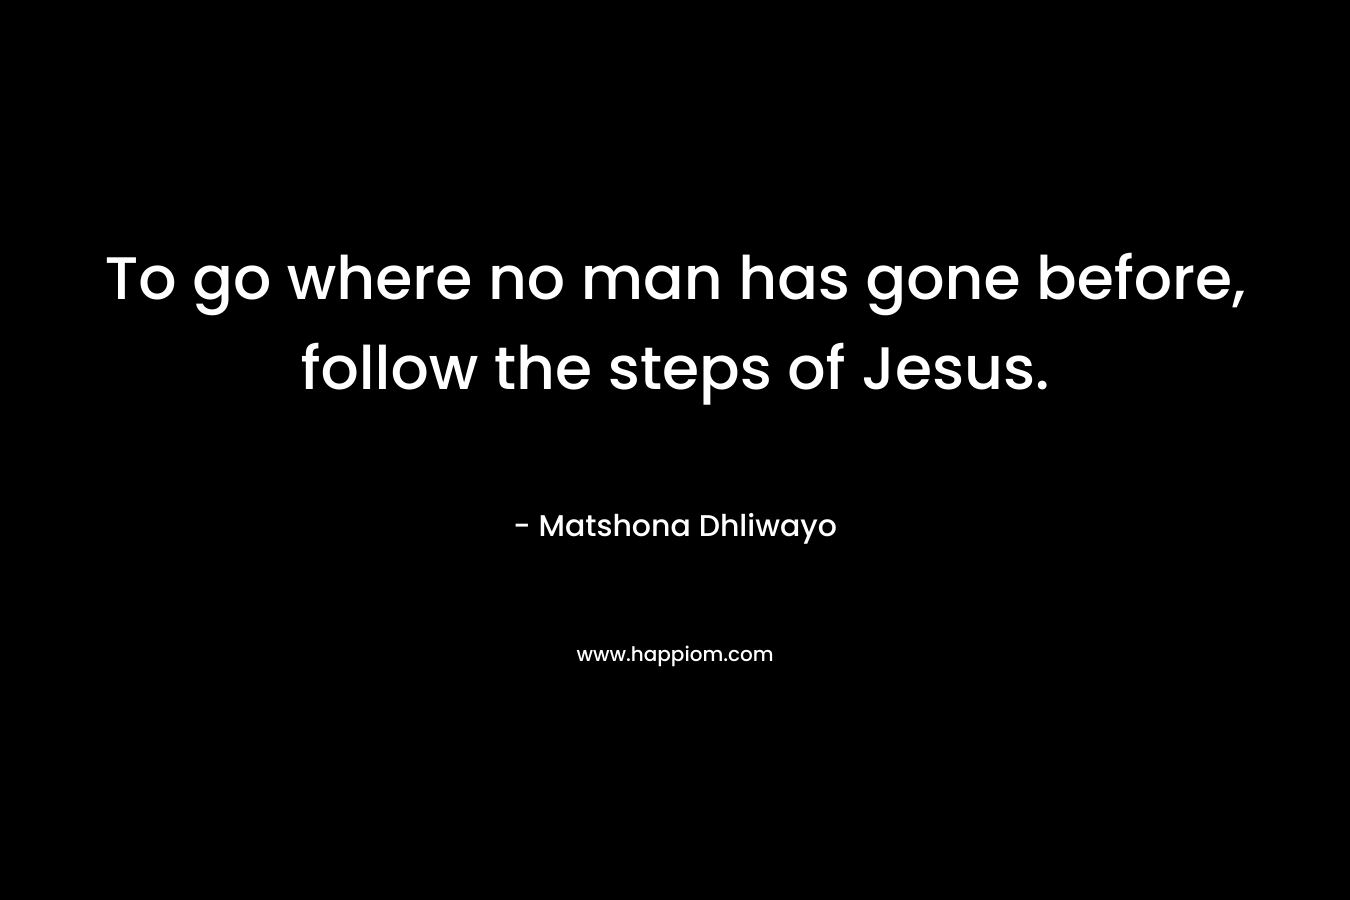 To go where no man has gone before, follow the steps of Jesus.